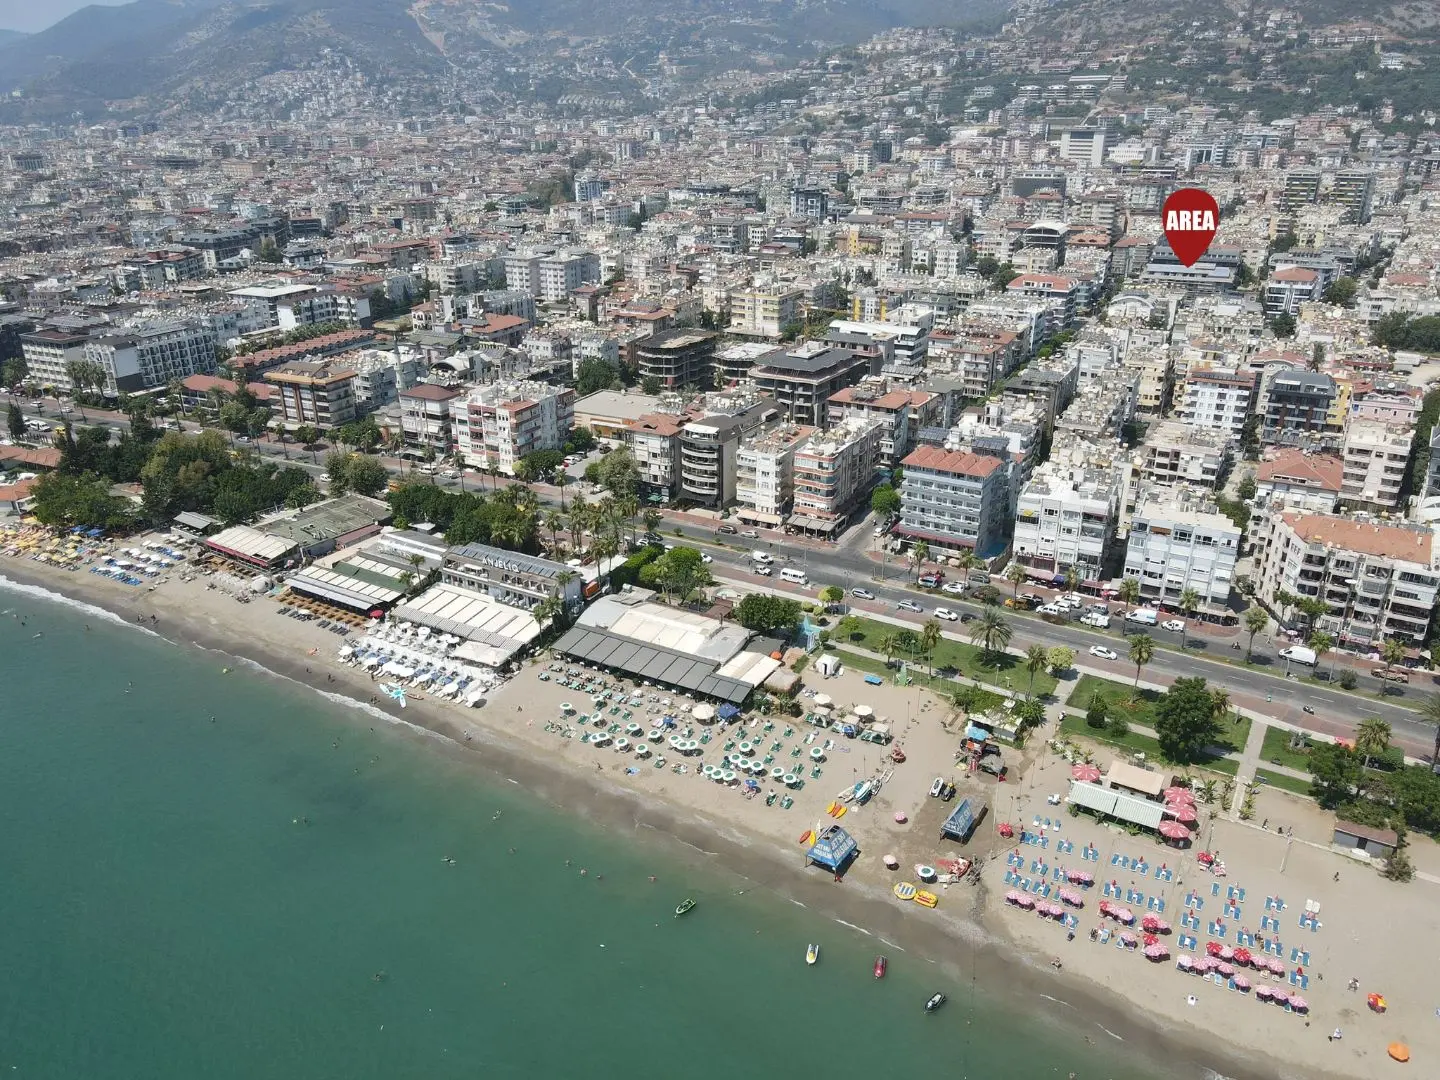 NEW PROJECT IN ALANYA CITY CENTER ONLY 300 METERS TO THE SEA